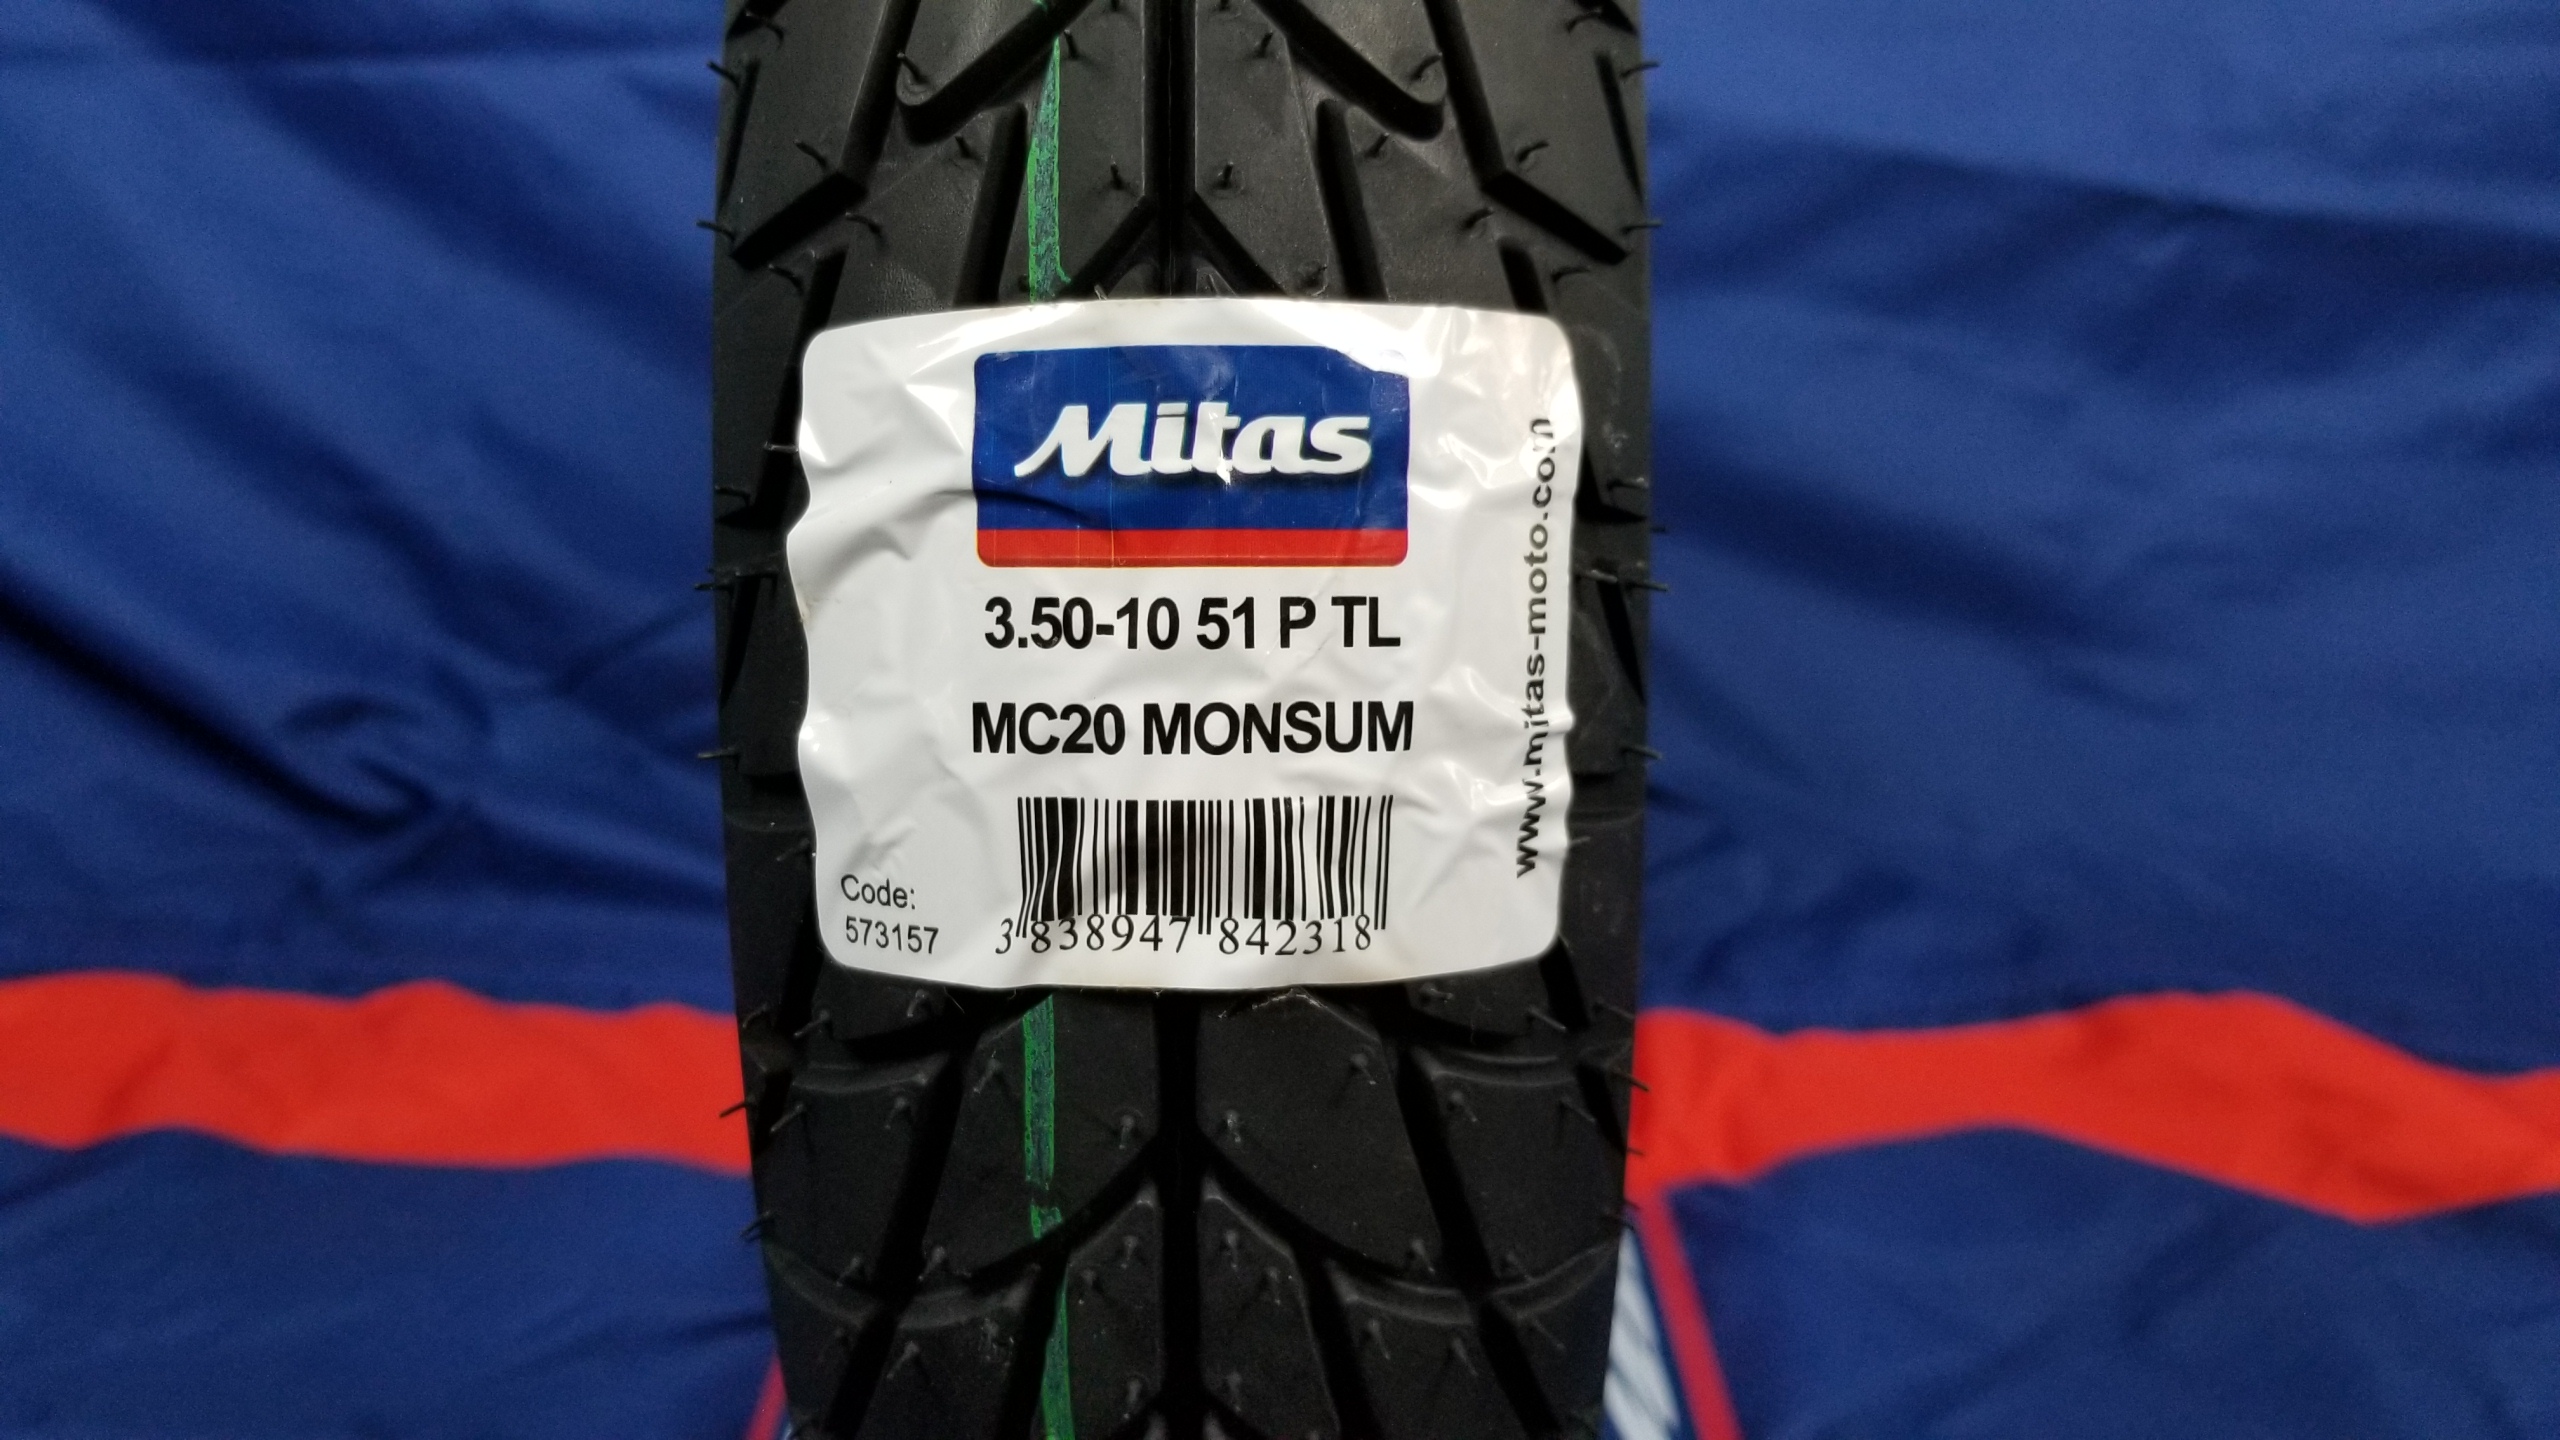 Size 3.50-10 tubeless tires for dirt bikes, motorcycles, scooters